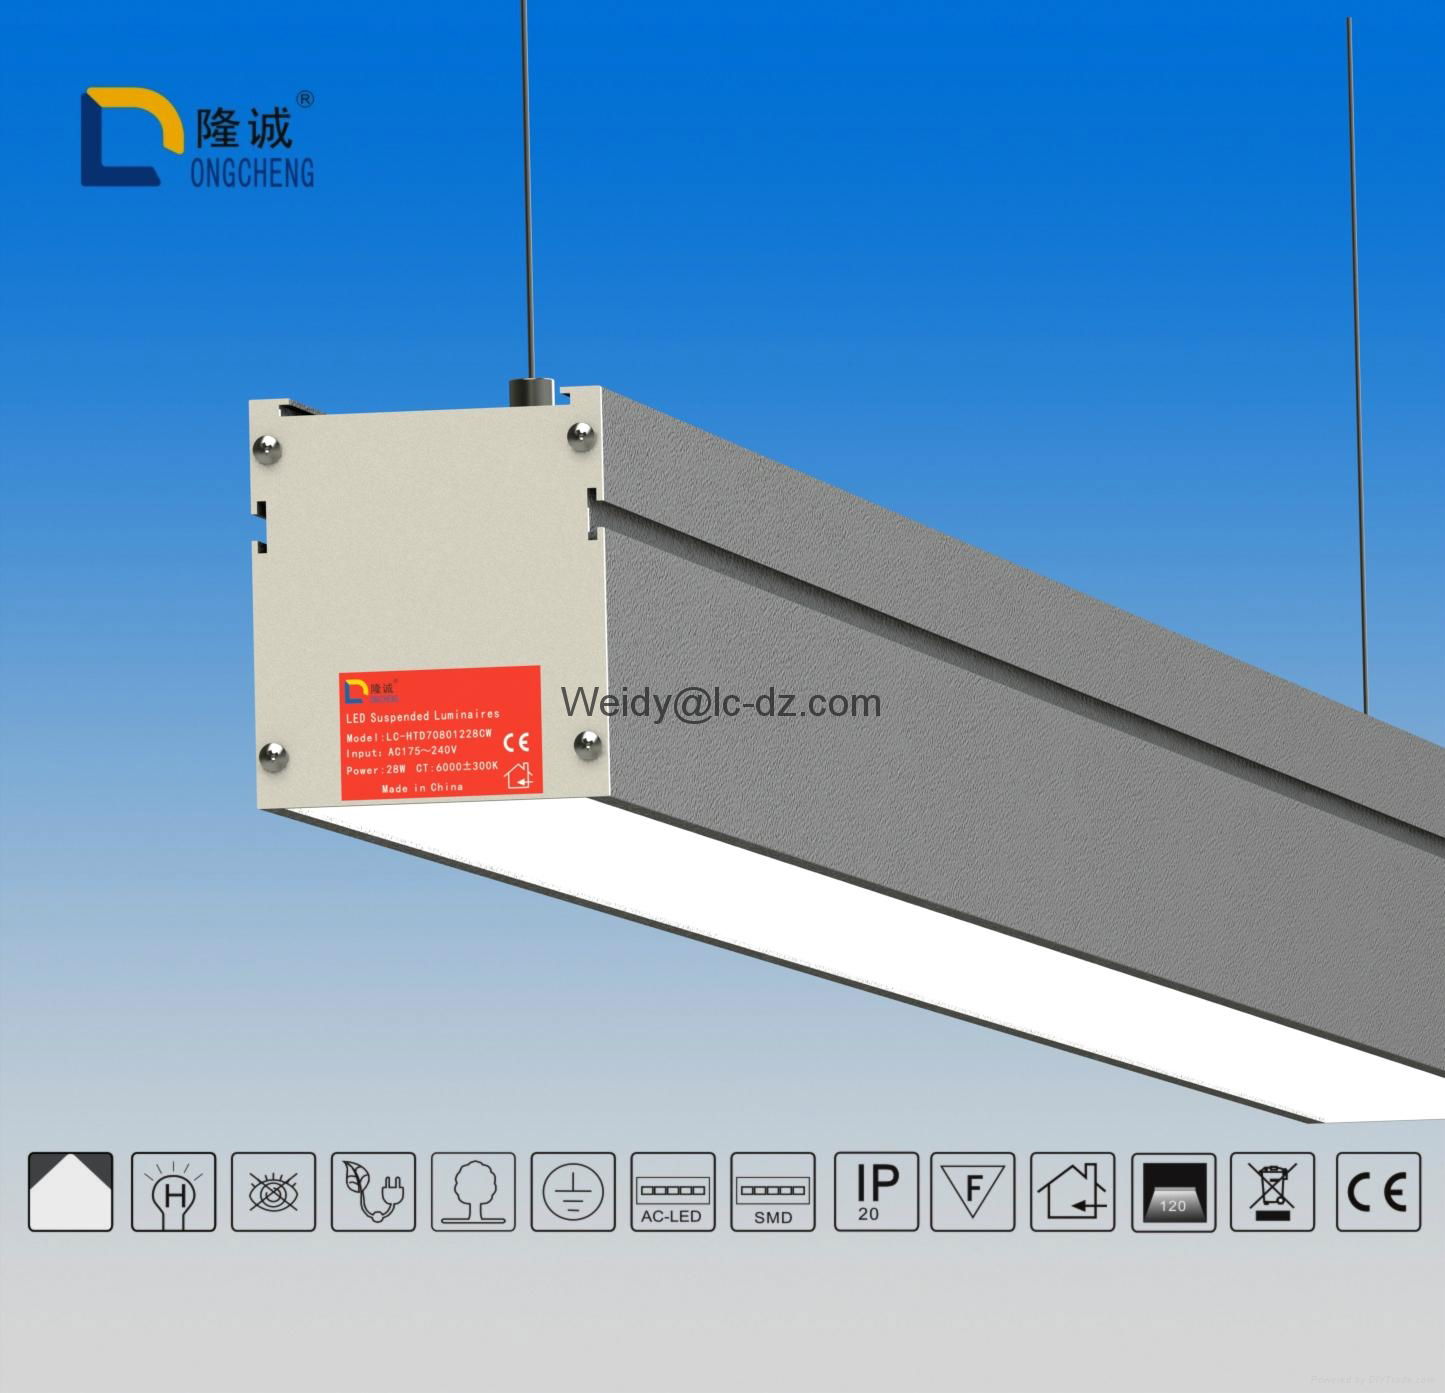 SMD chip DALI dimming system for linear office lamps 5